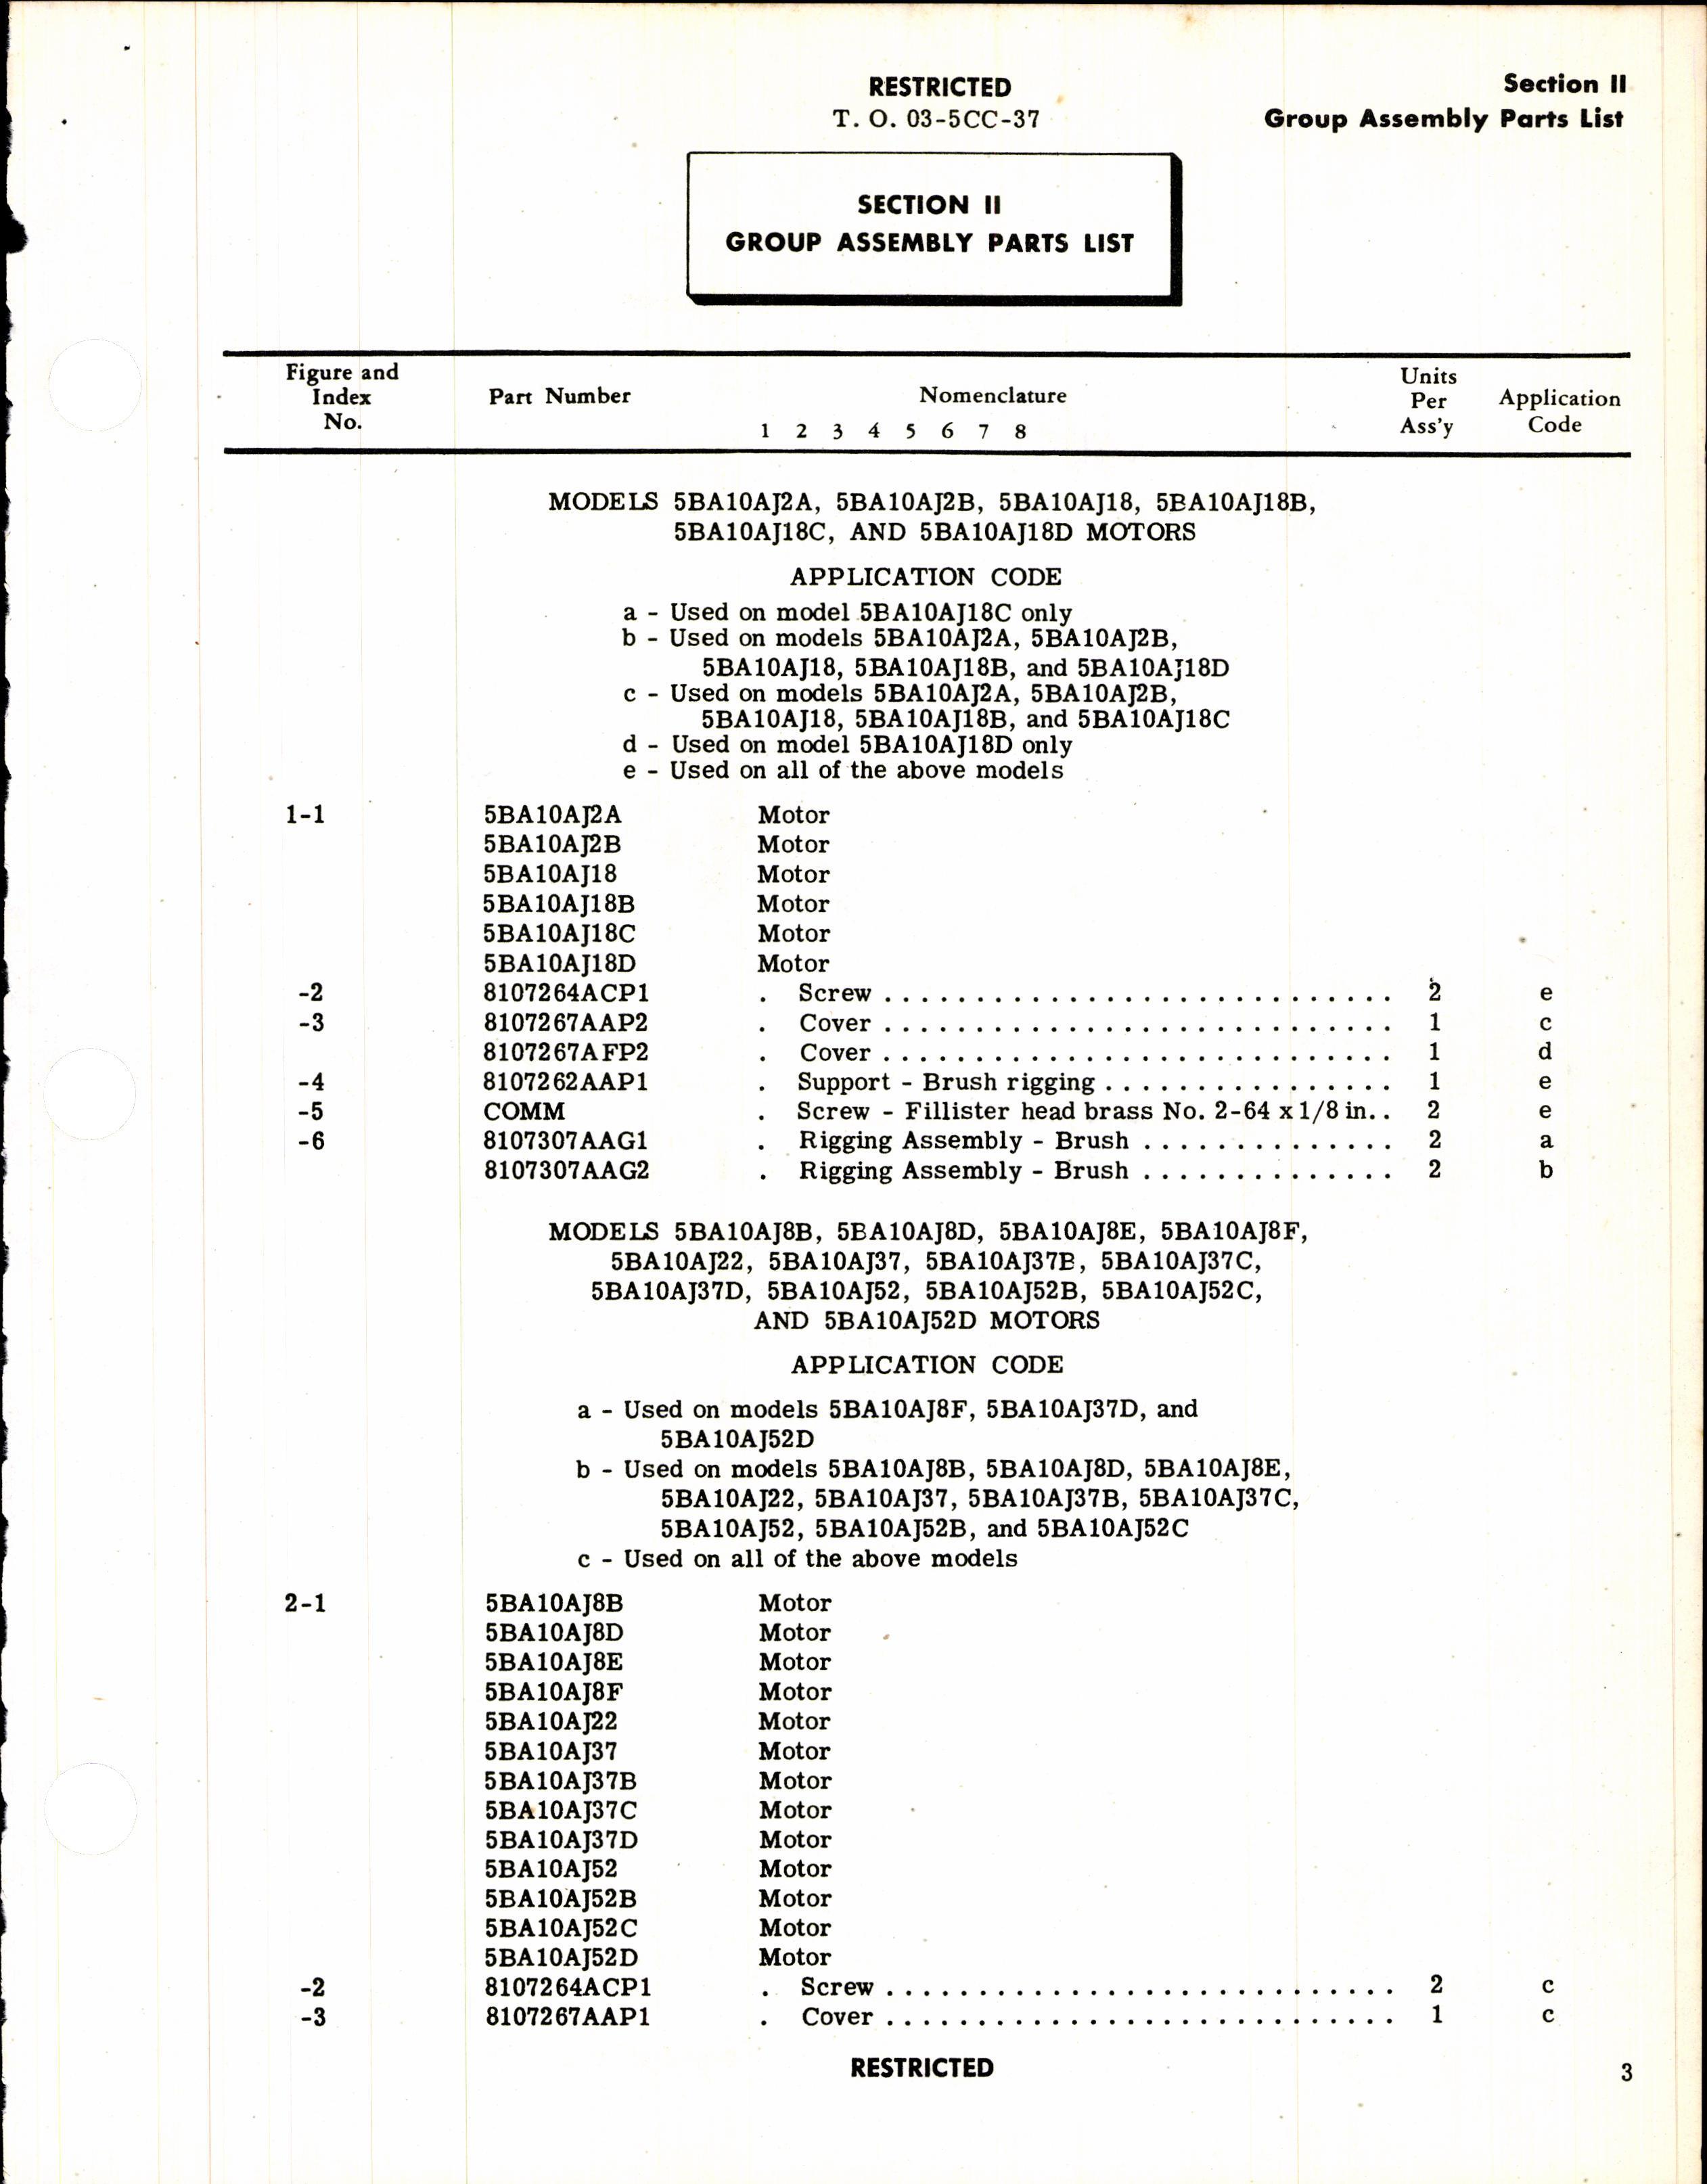 Sample page 5 from AirCorps Library document: Parts Catalog for General Electric Aircraft Motors, Series 5BA10